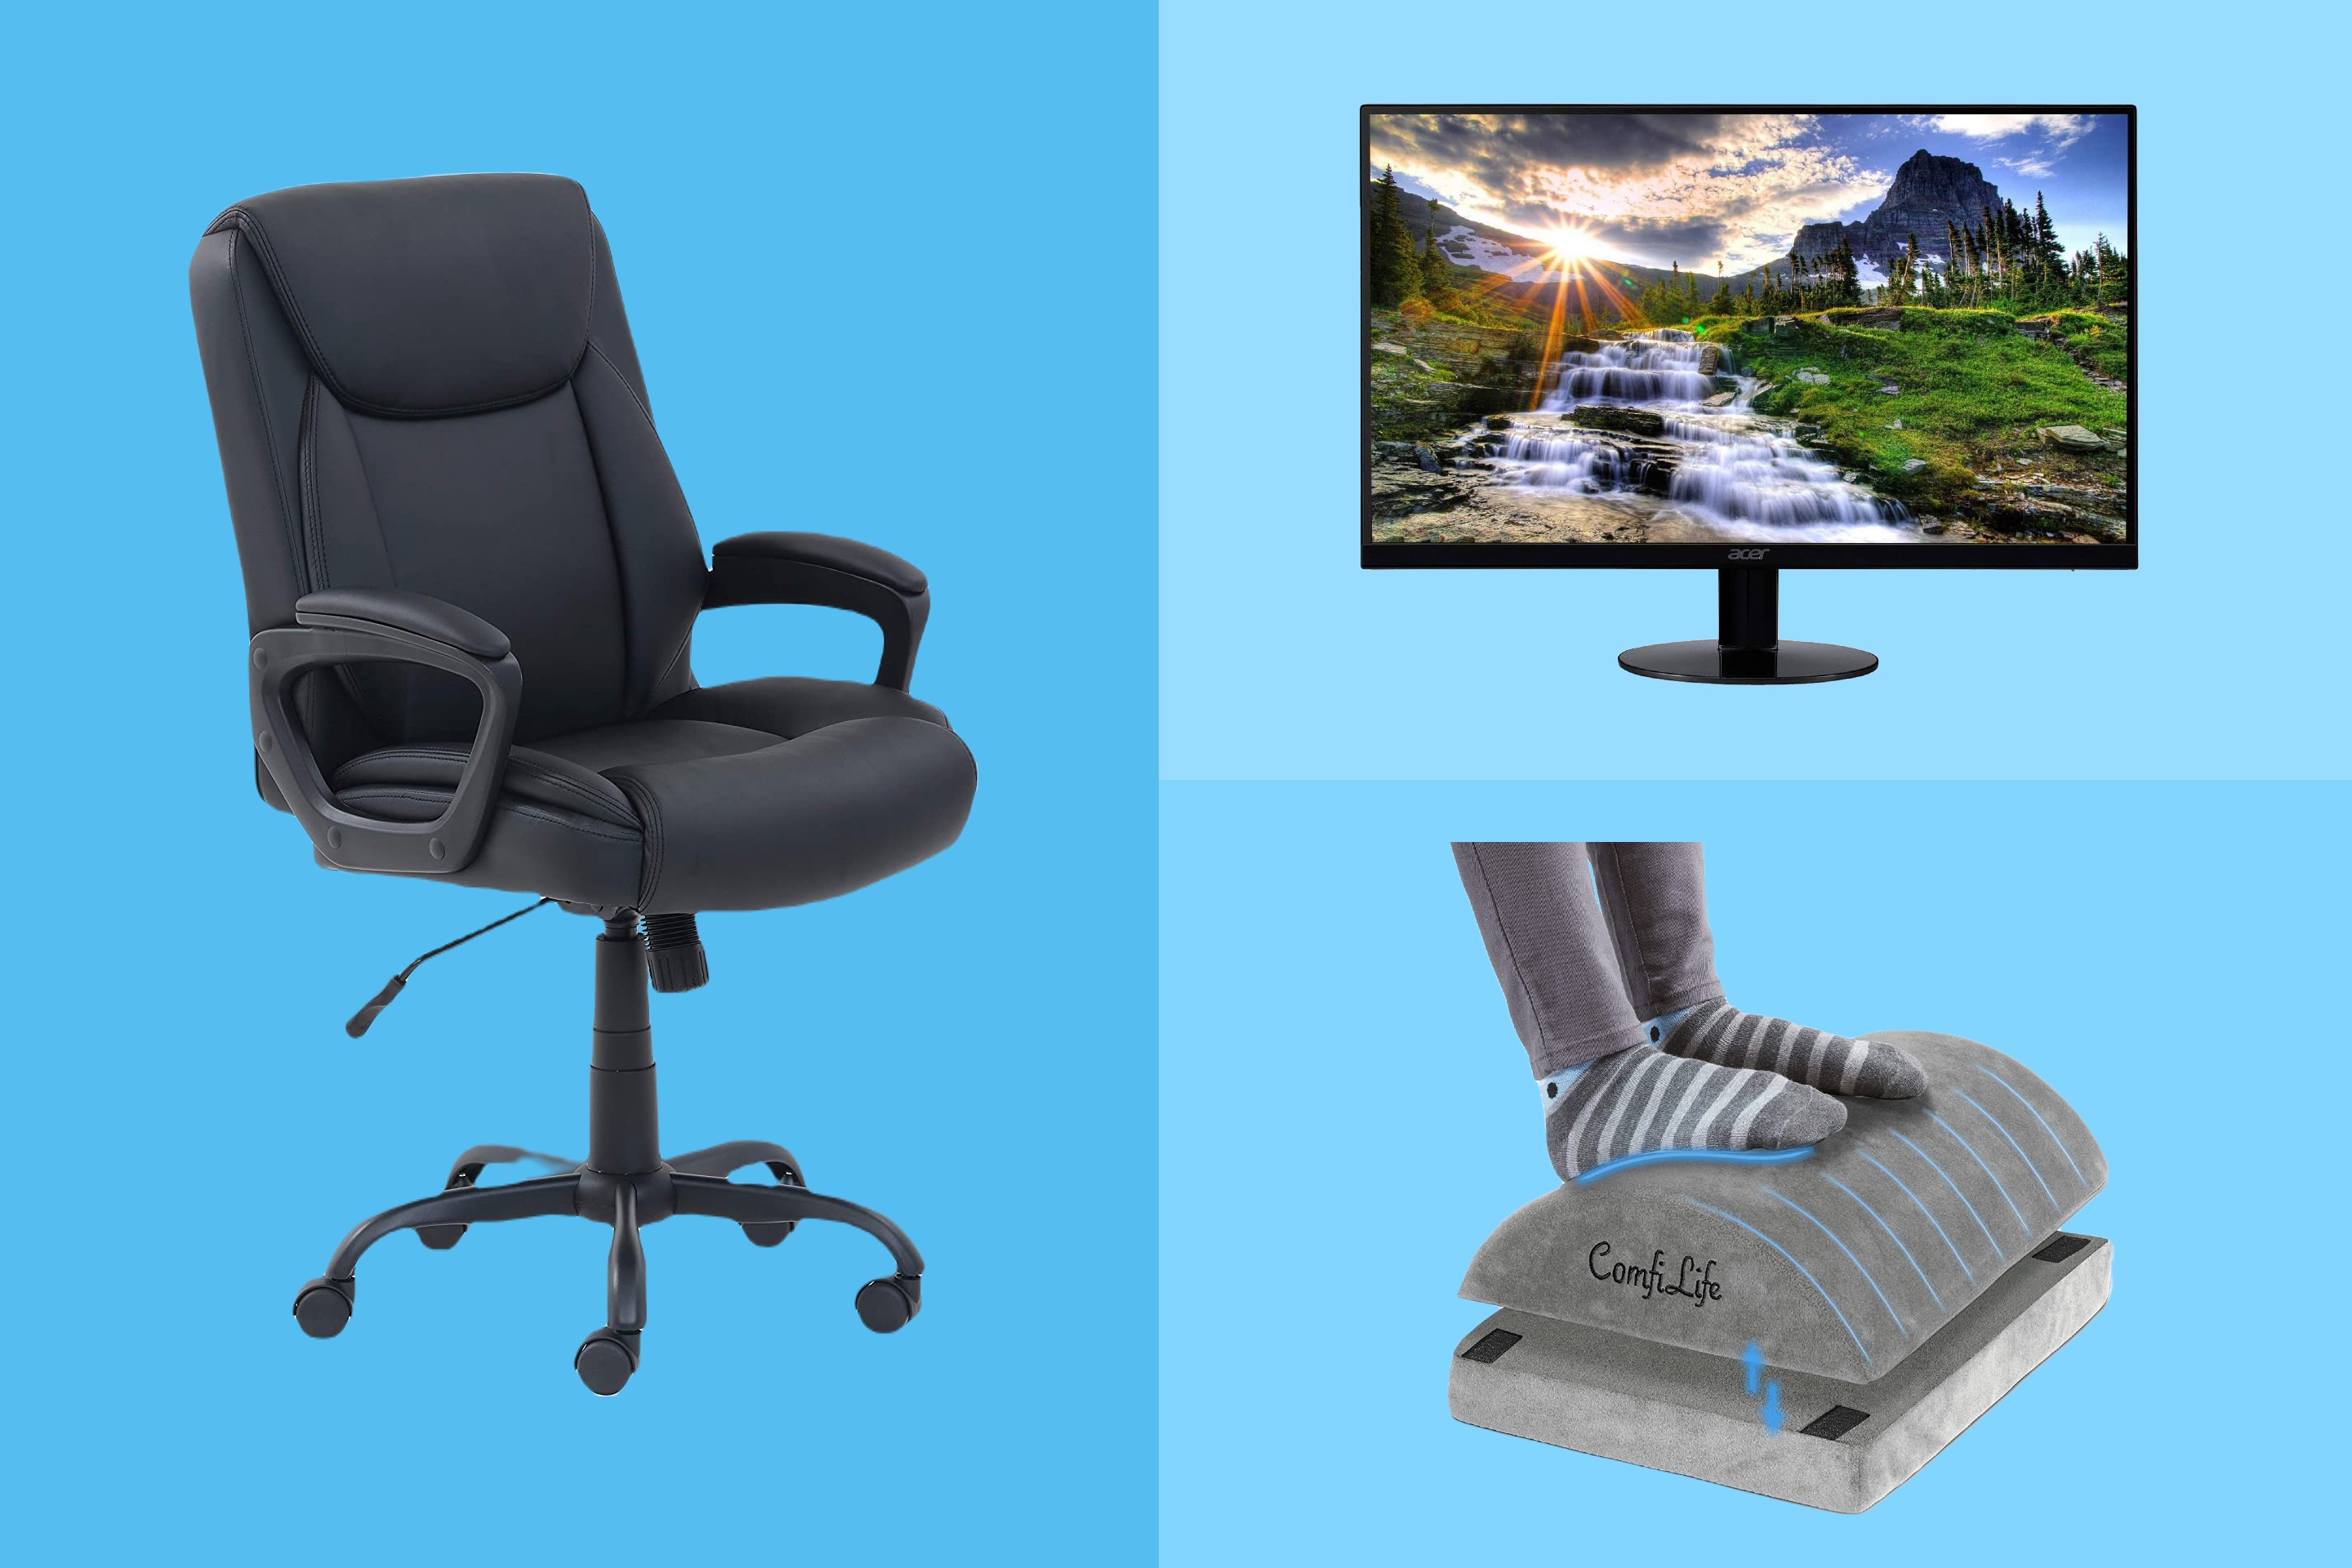 8 Cheap Alternatives to Pricey Home Office Gear